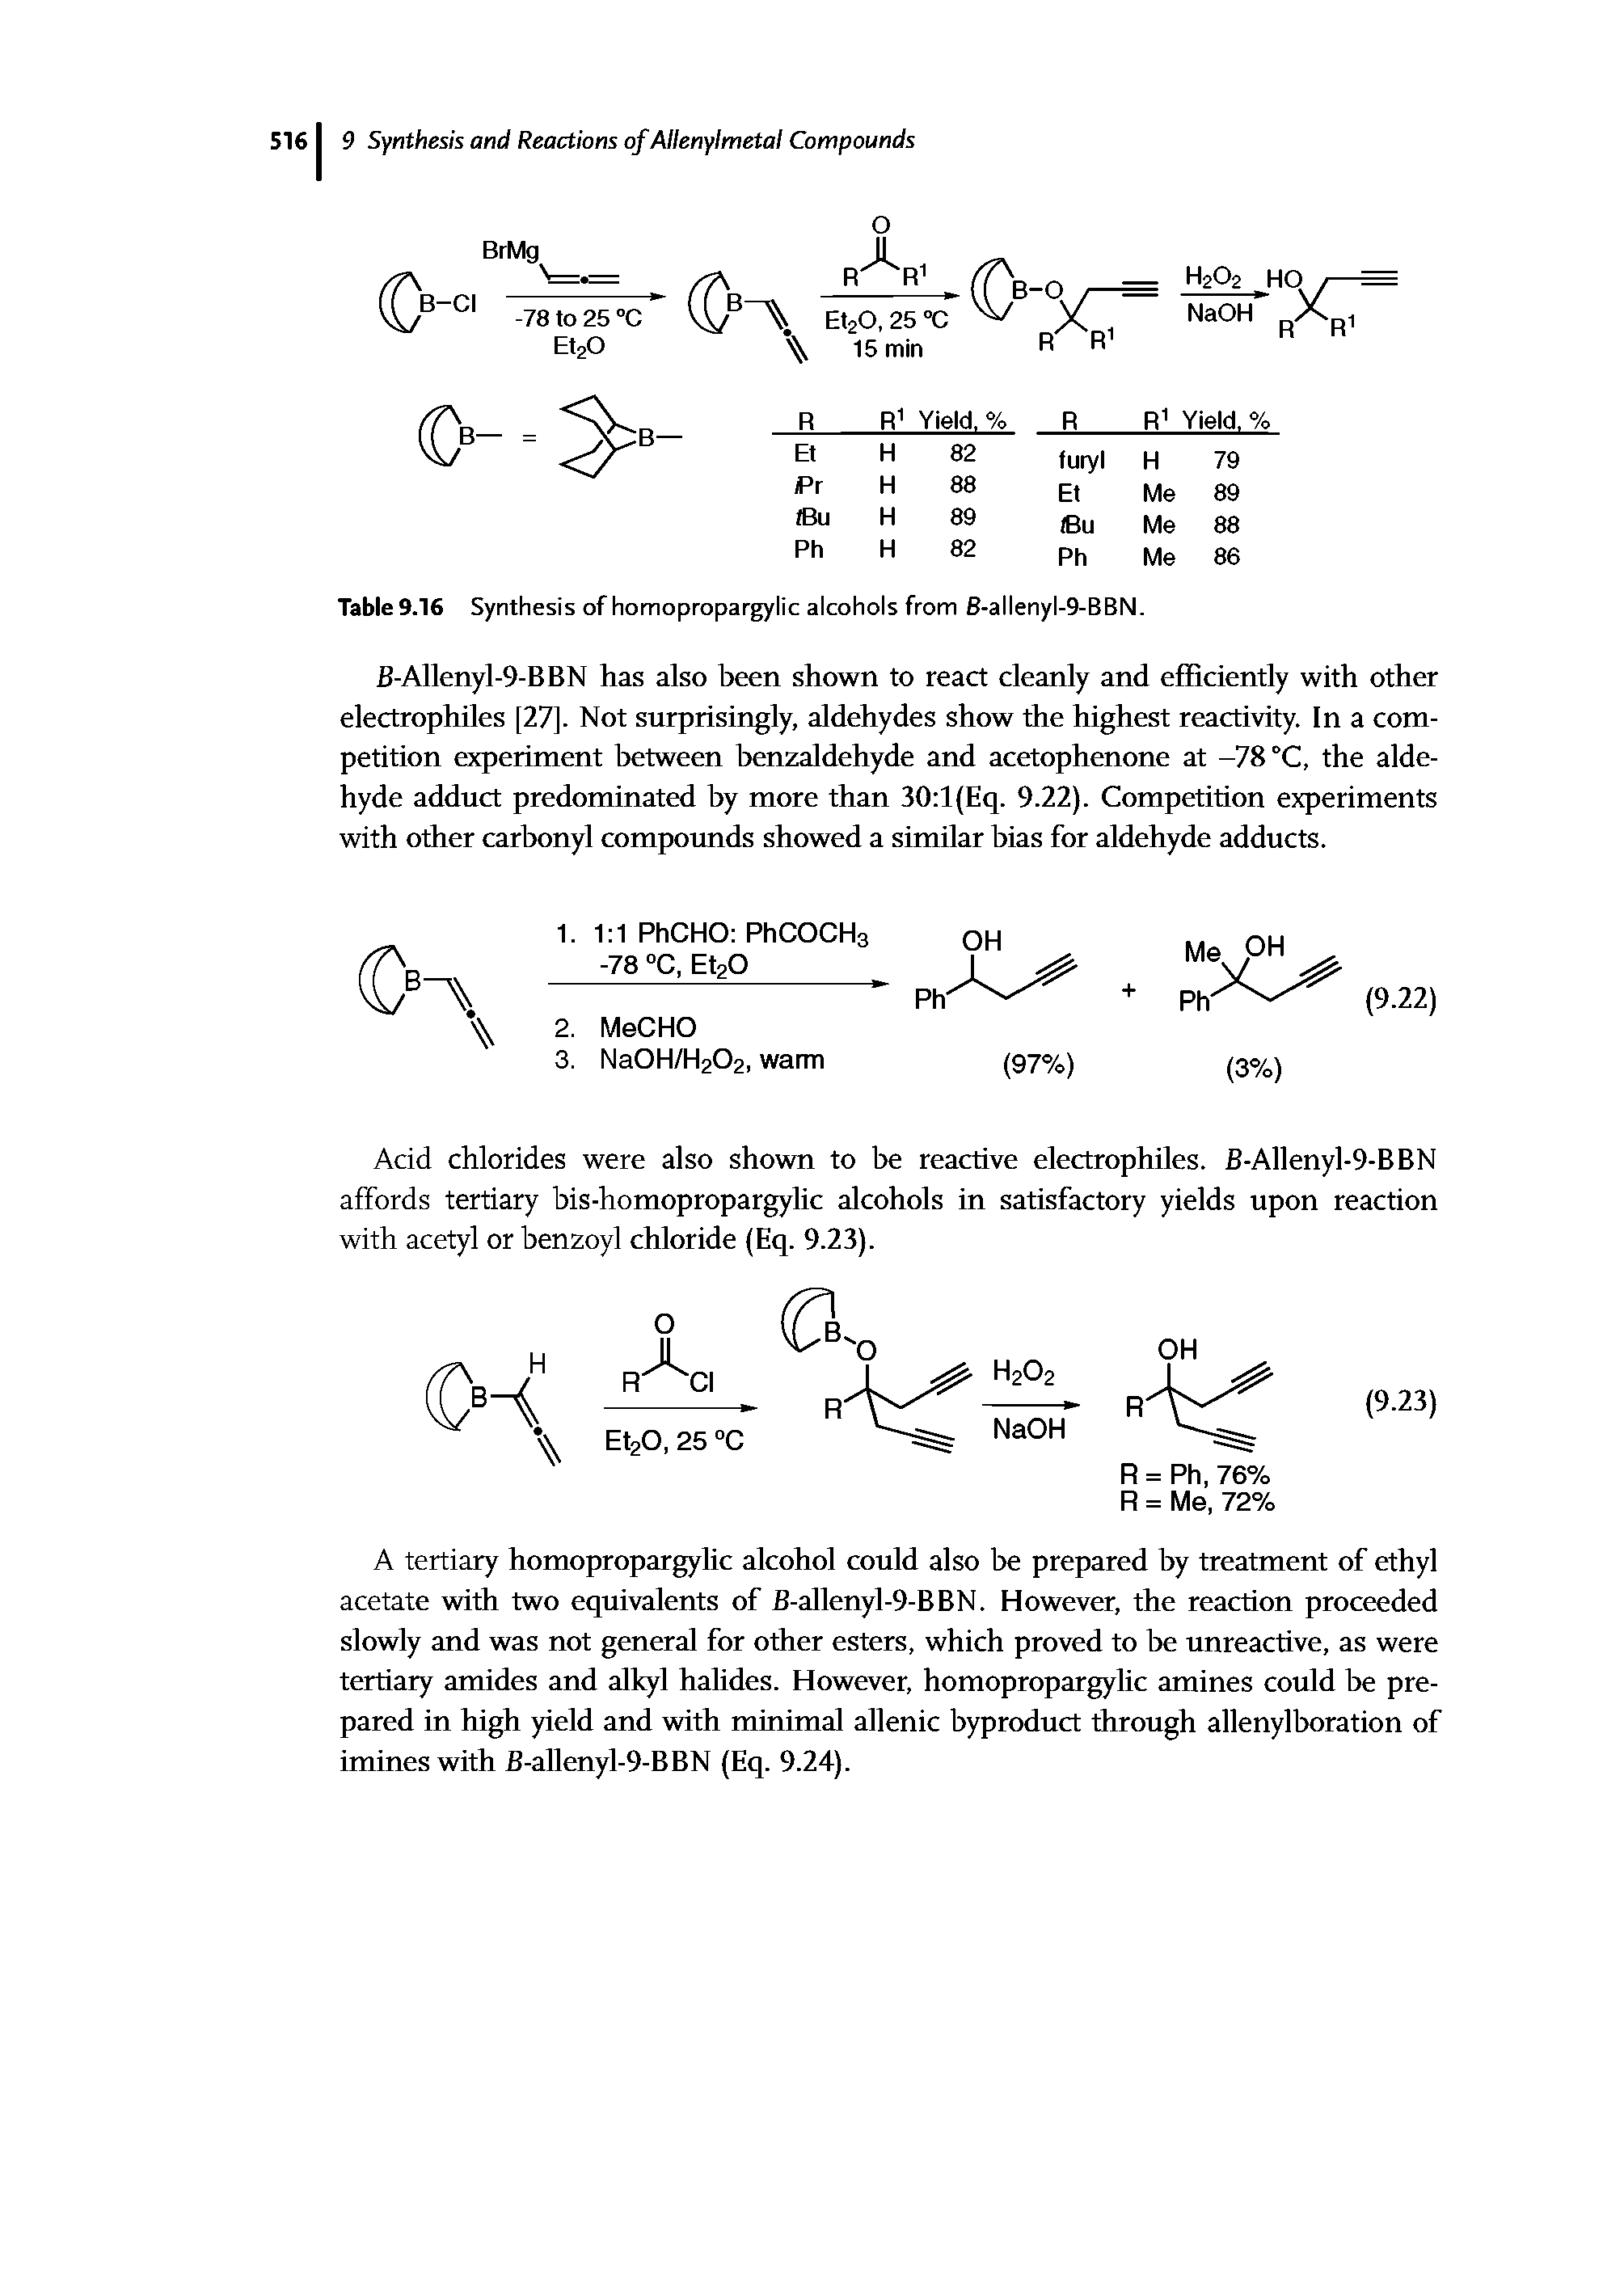 Table 9.16 Synthesis of homopropargylic alcohols from B-allenyl-9-BBN.